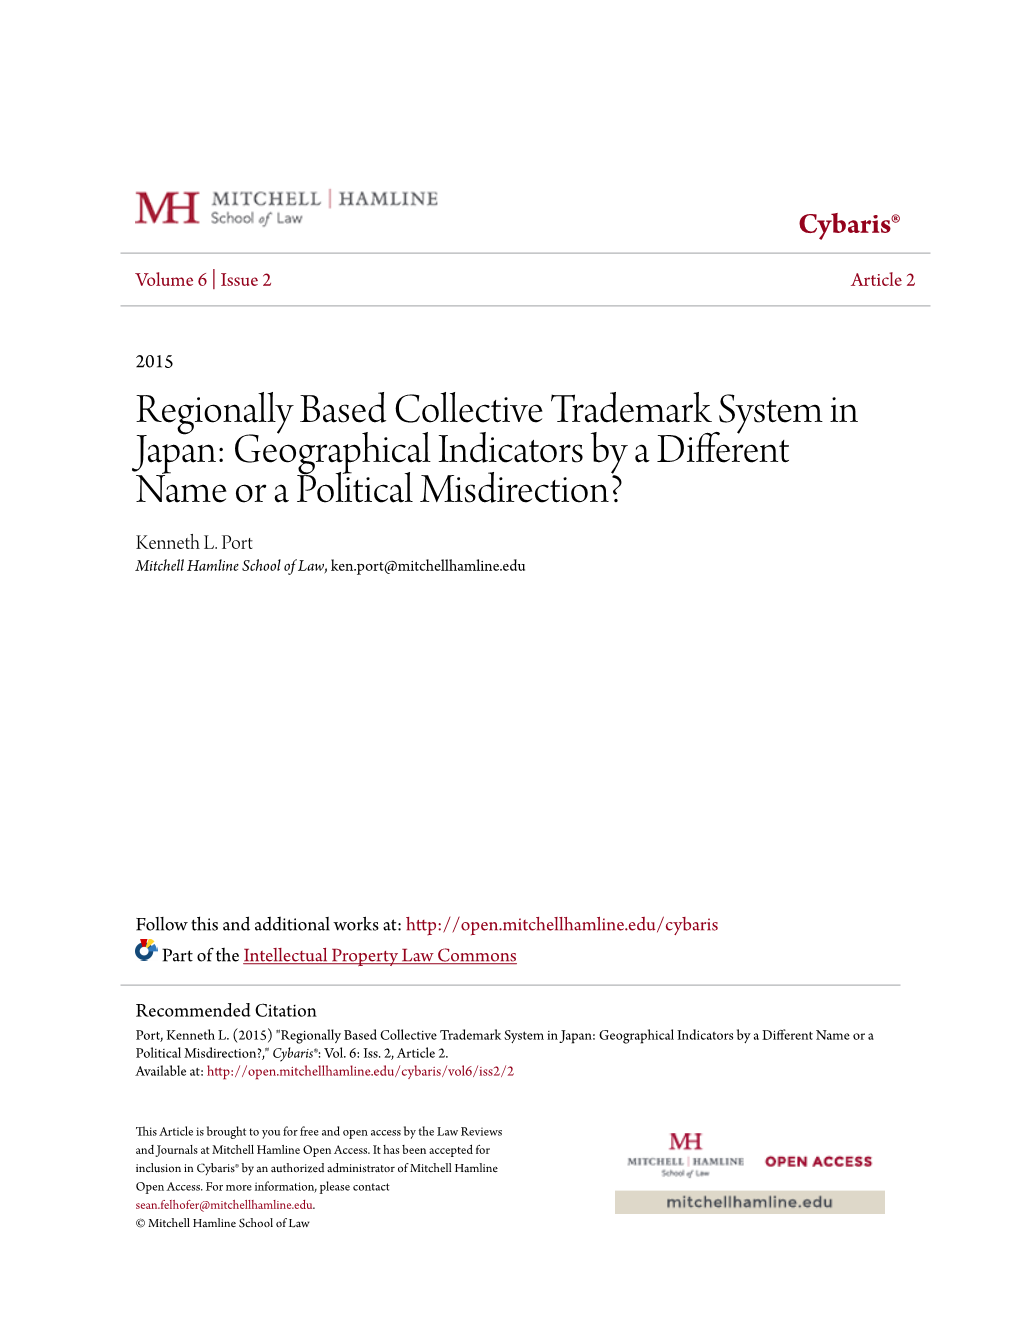 Regionally Based Collective Trademark System in Japan: Geographical Indicators by a Different Name Or a Political Misdirection? Kenneth L